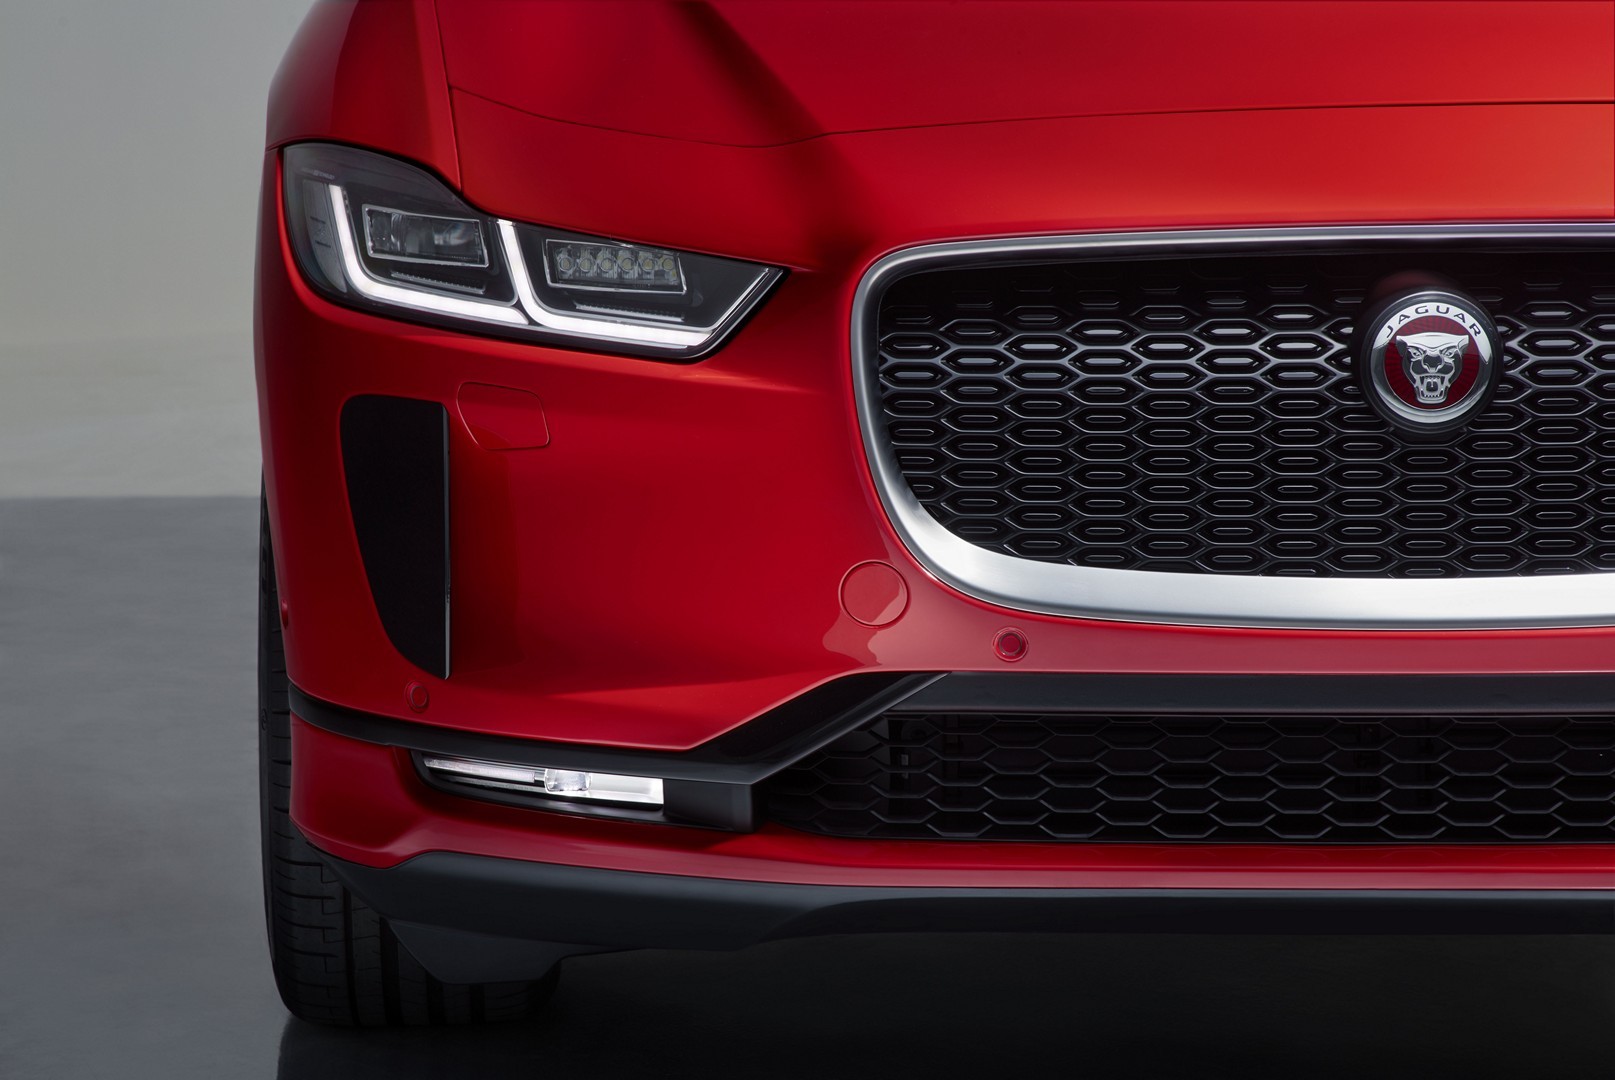 https://s1.cdn.autoevolution.com/images/news/gallery/2020-jaguar-i-pace-update-offers-234-miles-of-range-thanks-to-etrophy-know-how_17.jpg